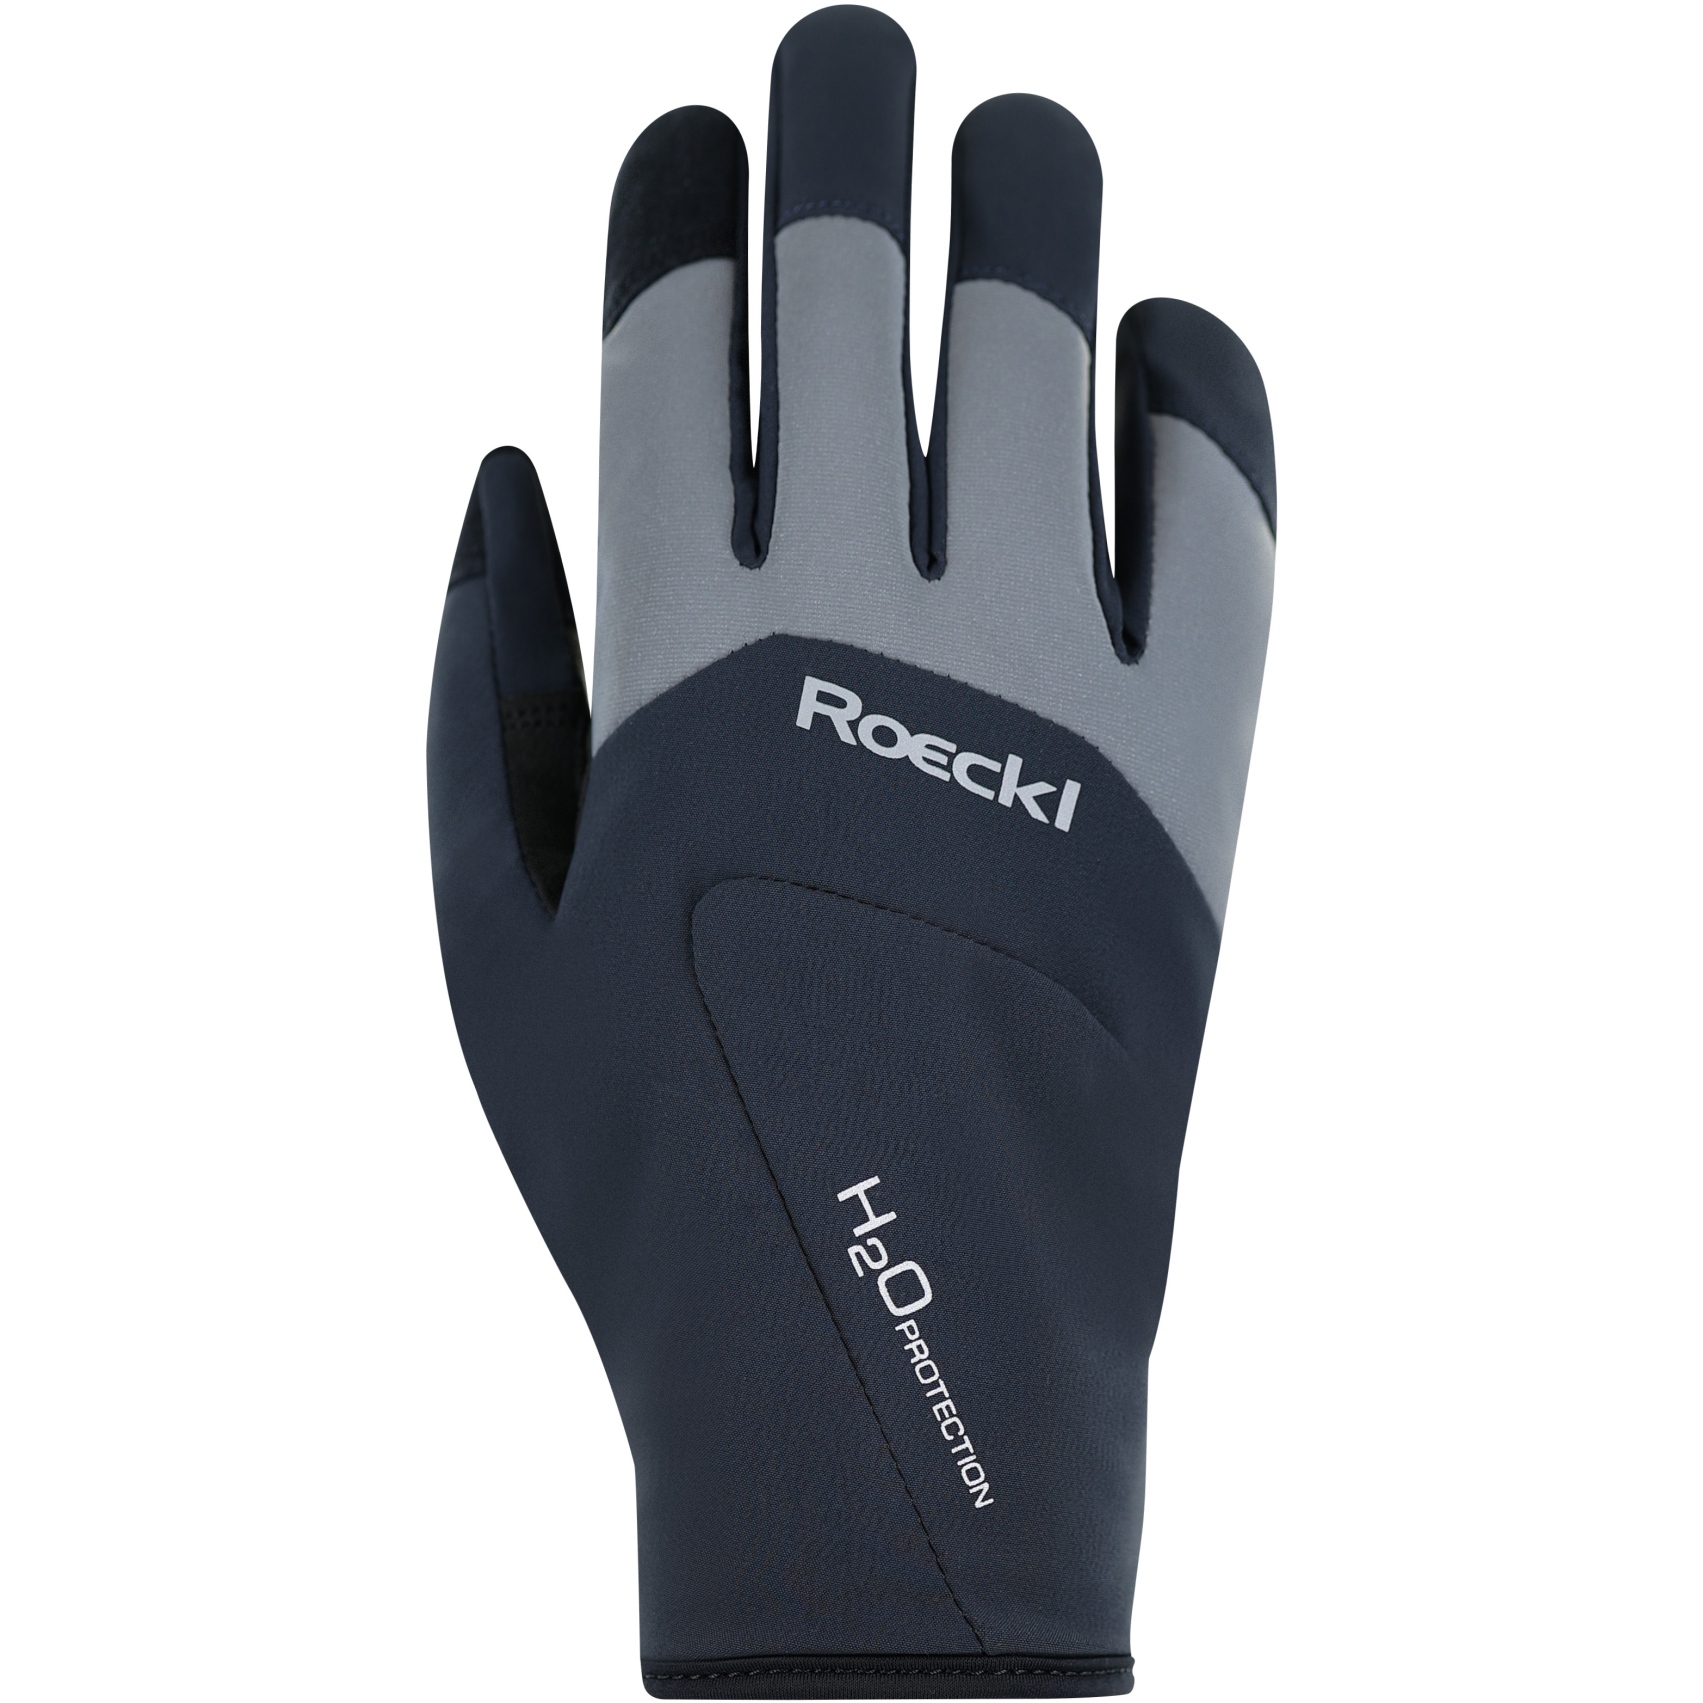 Picture of Roeckl Sports Rapallo Cycling Gloves - dress black 9200